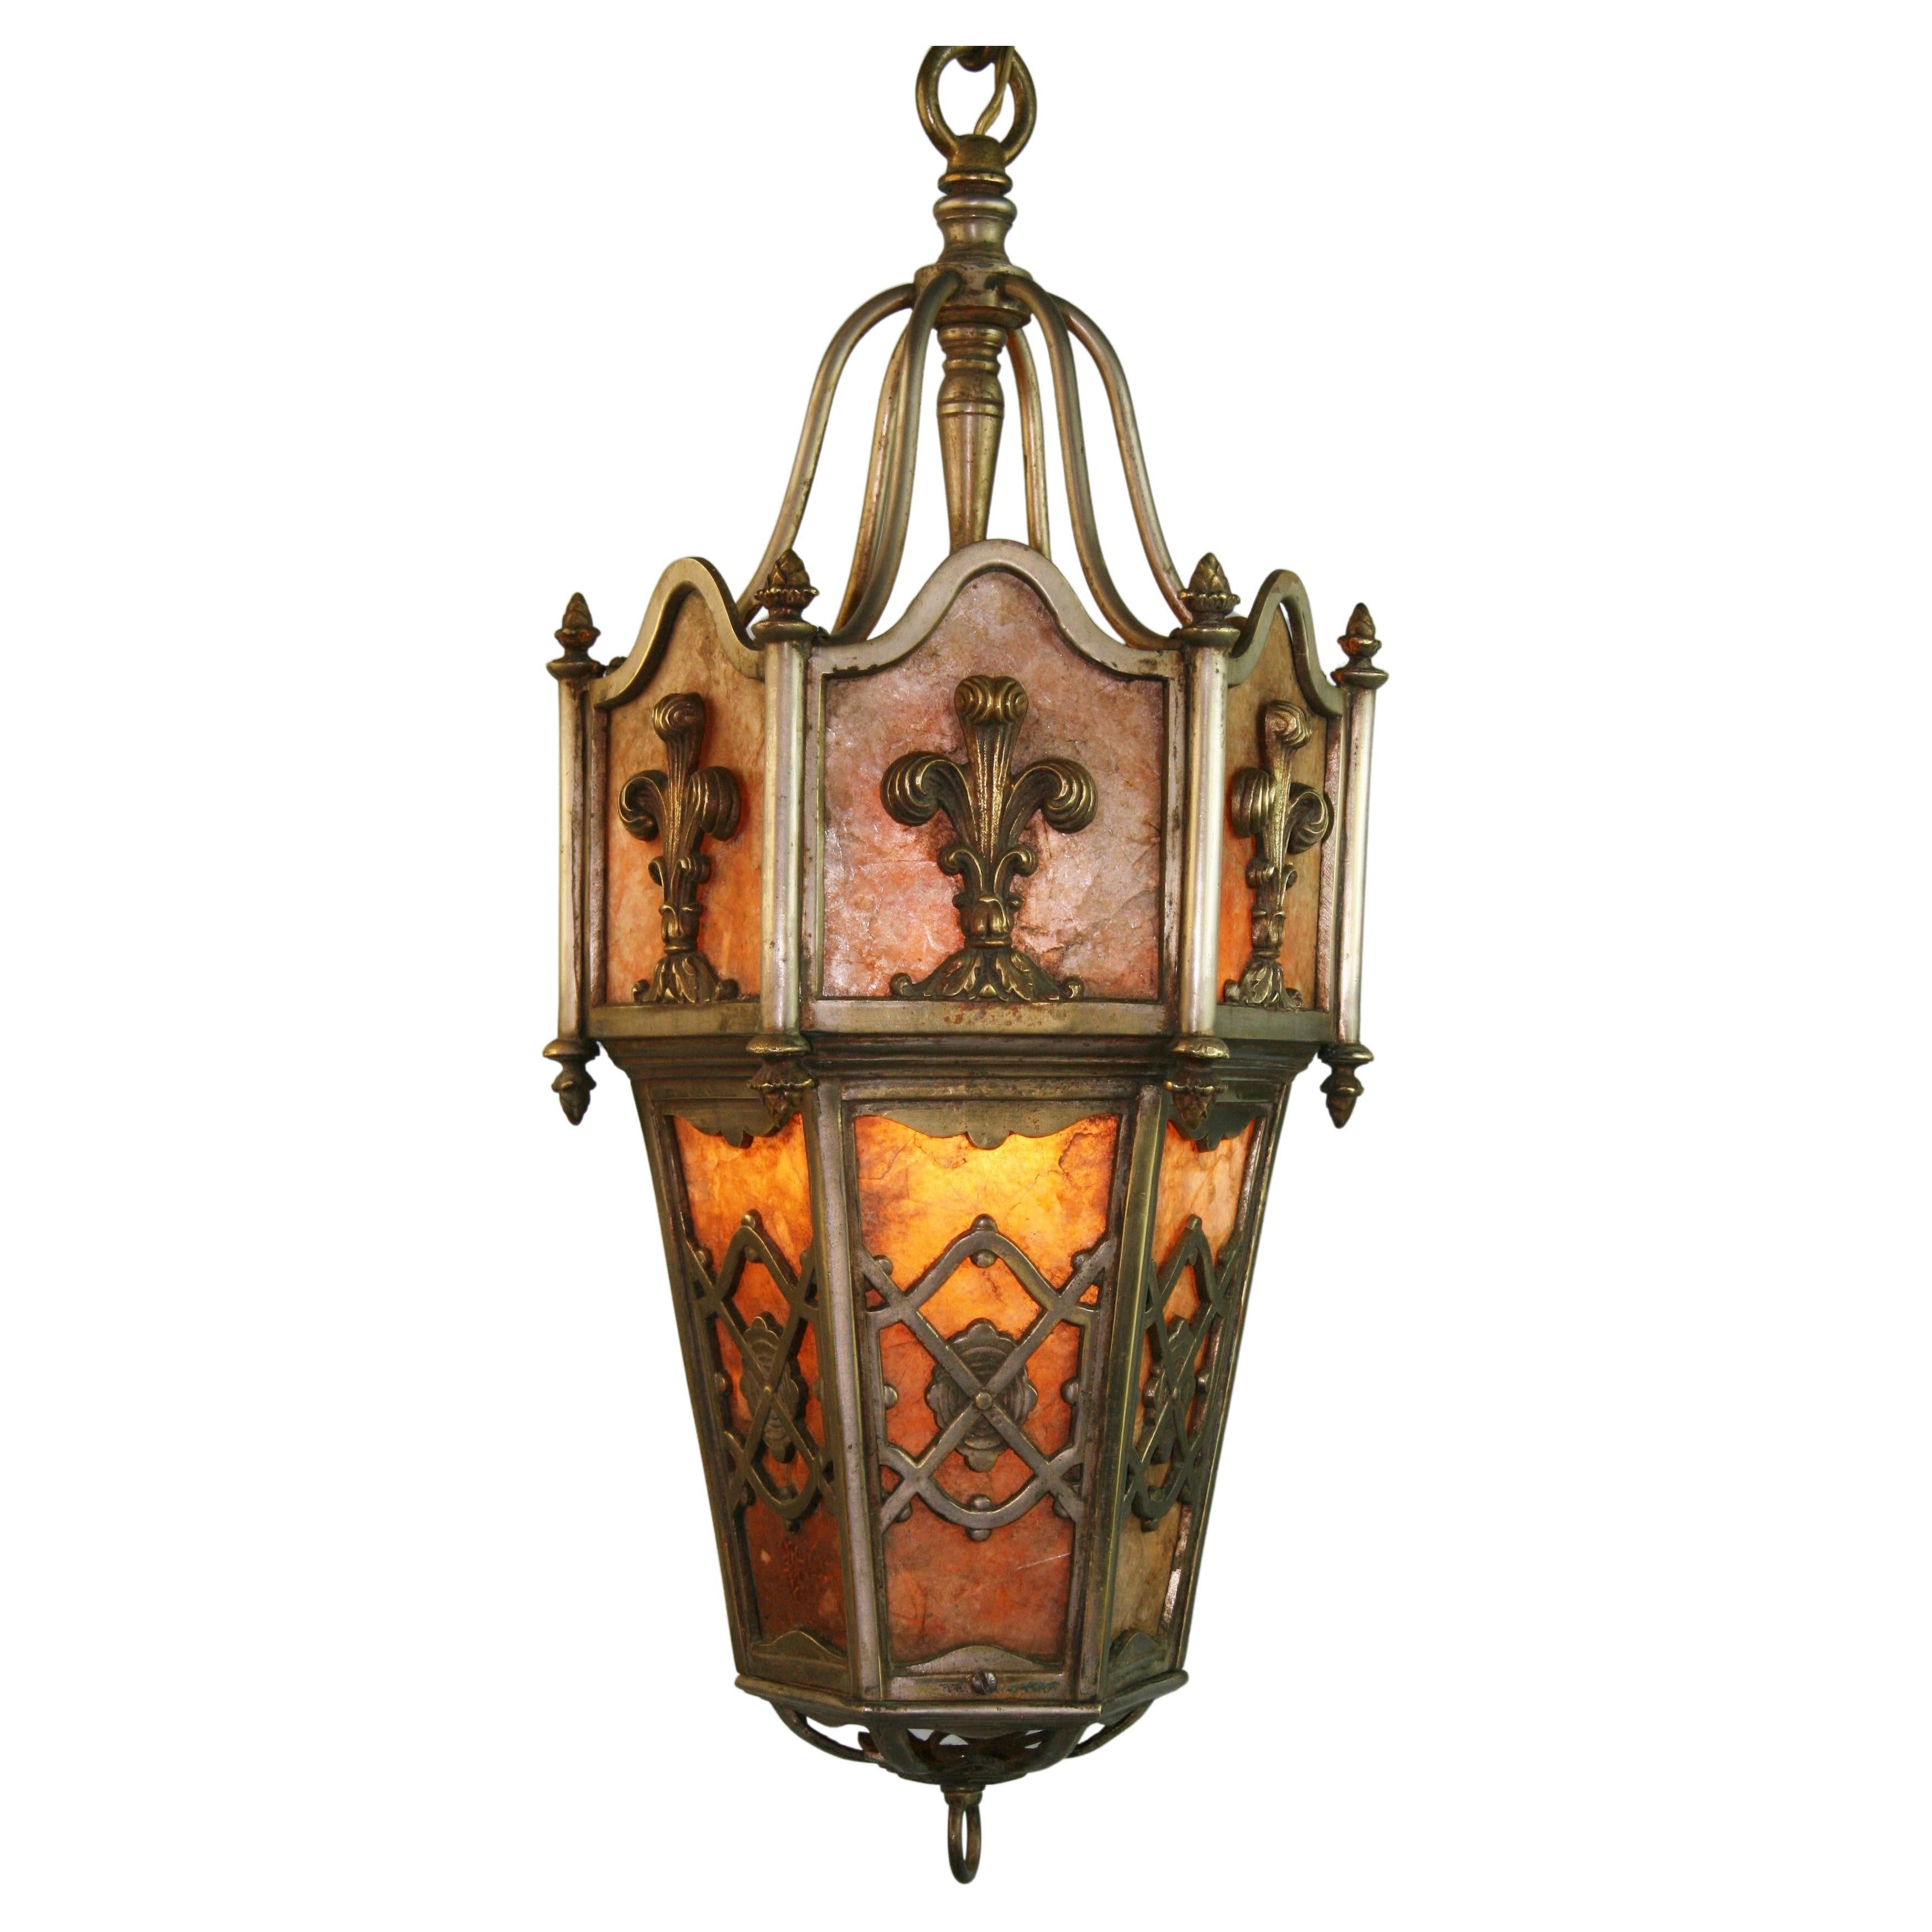 English Silvered Bronze Lantern with Mica Panels 1920's